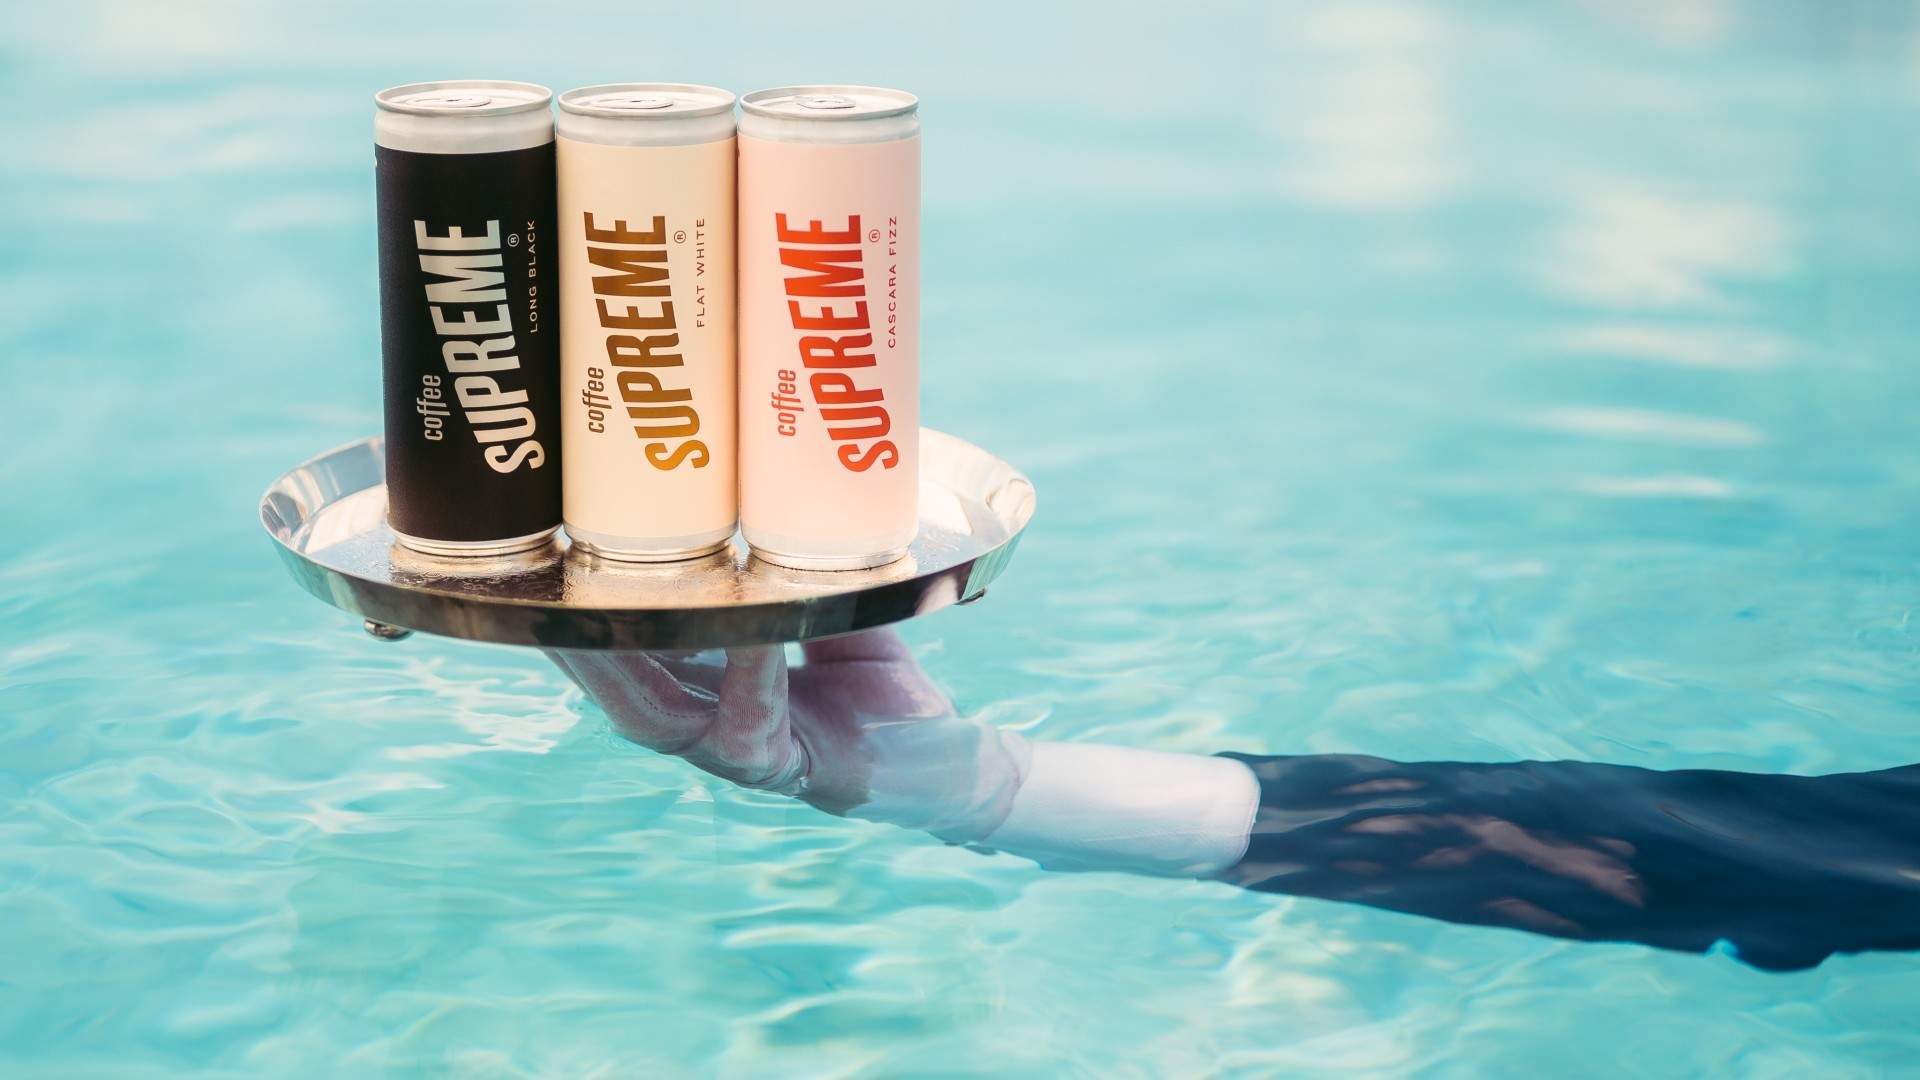 Supreme Is Releasing a Range of Canned Iced Coffee So You Can Stay Caffeinated on the Run